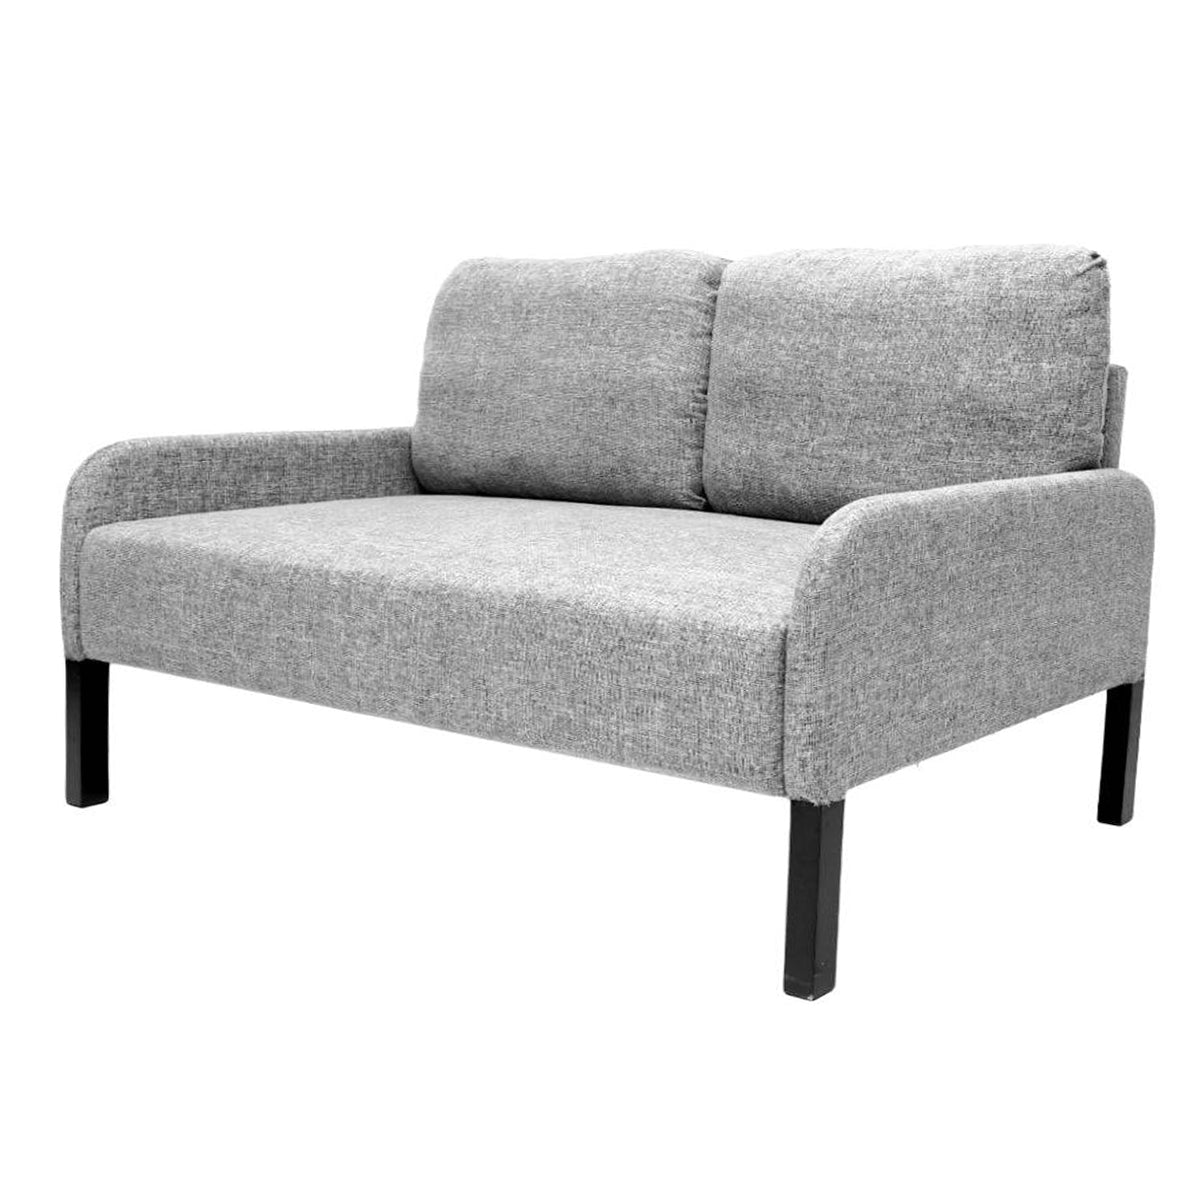 Billy 3 seater Sofa